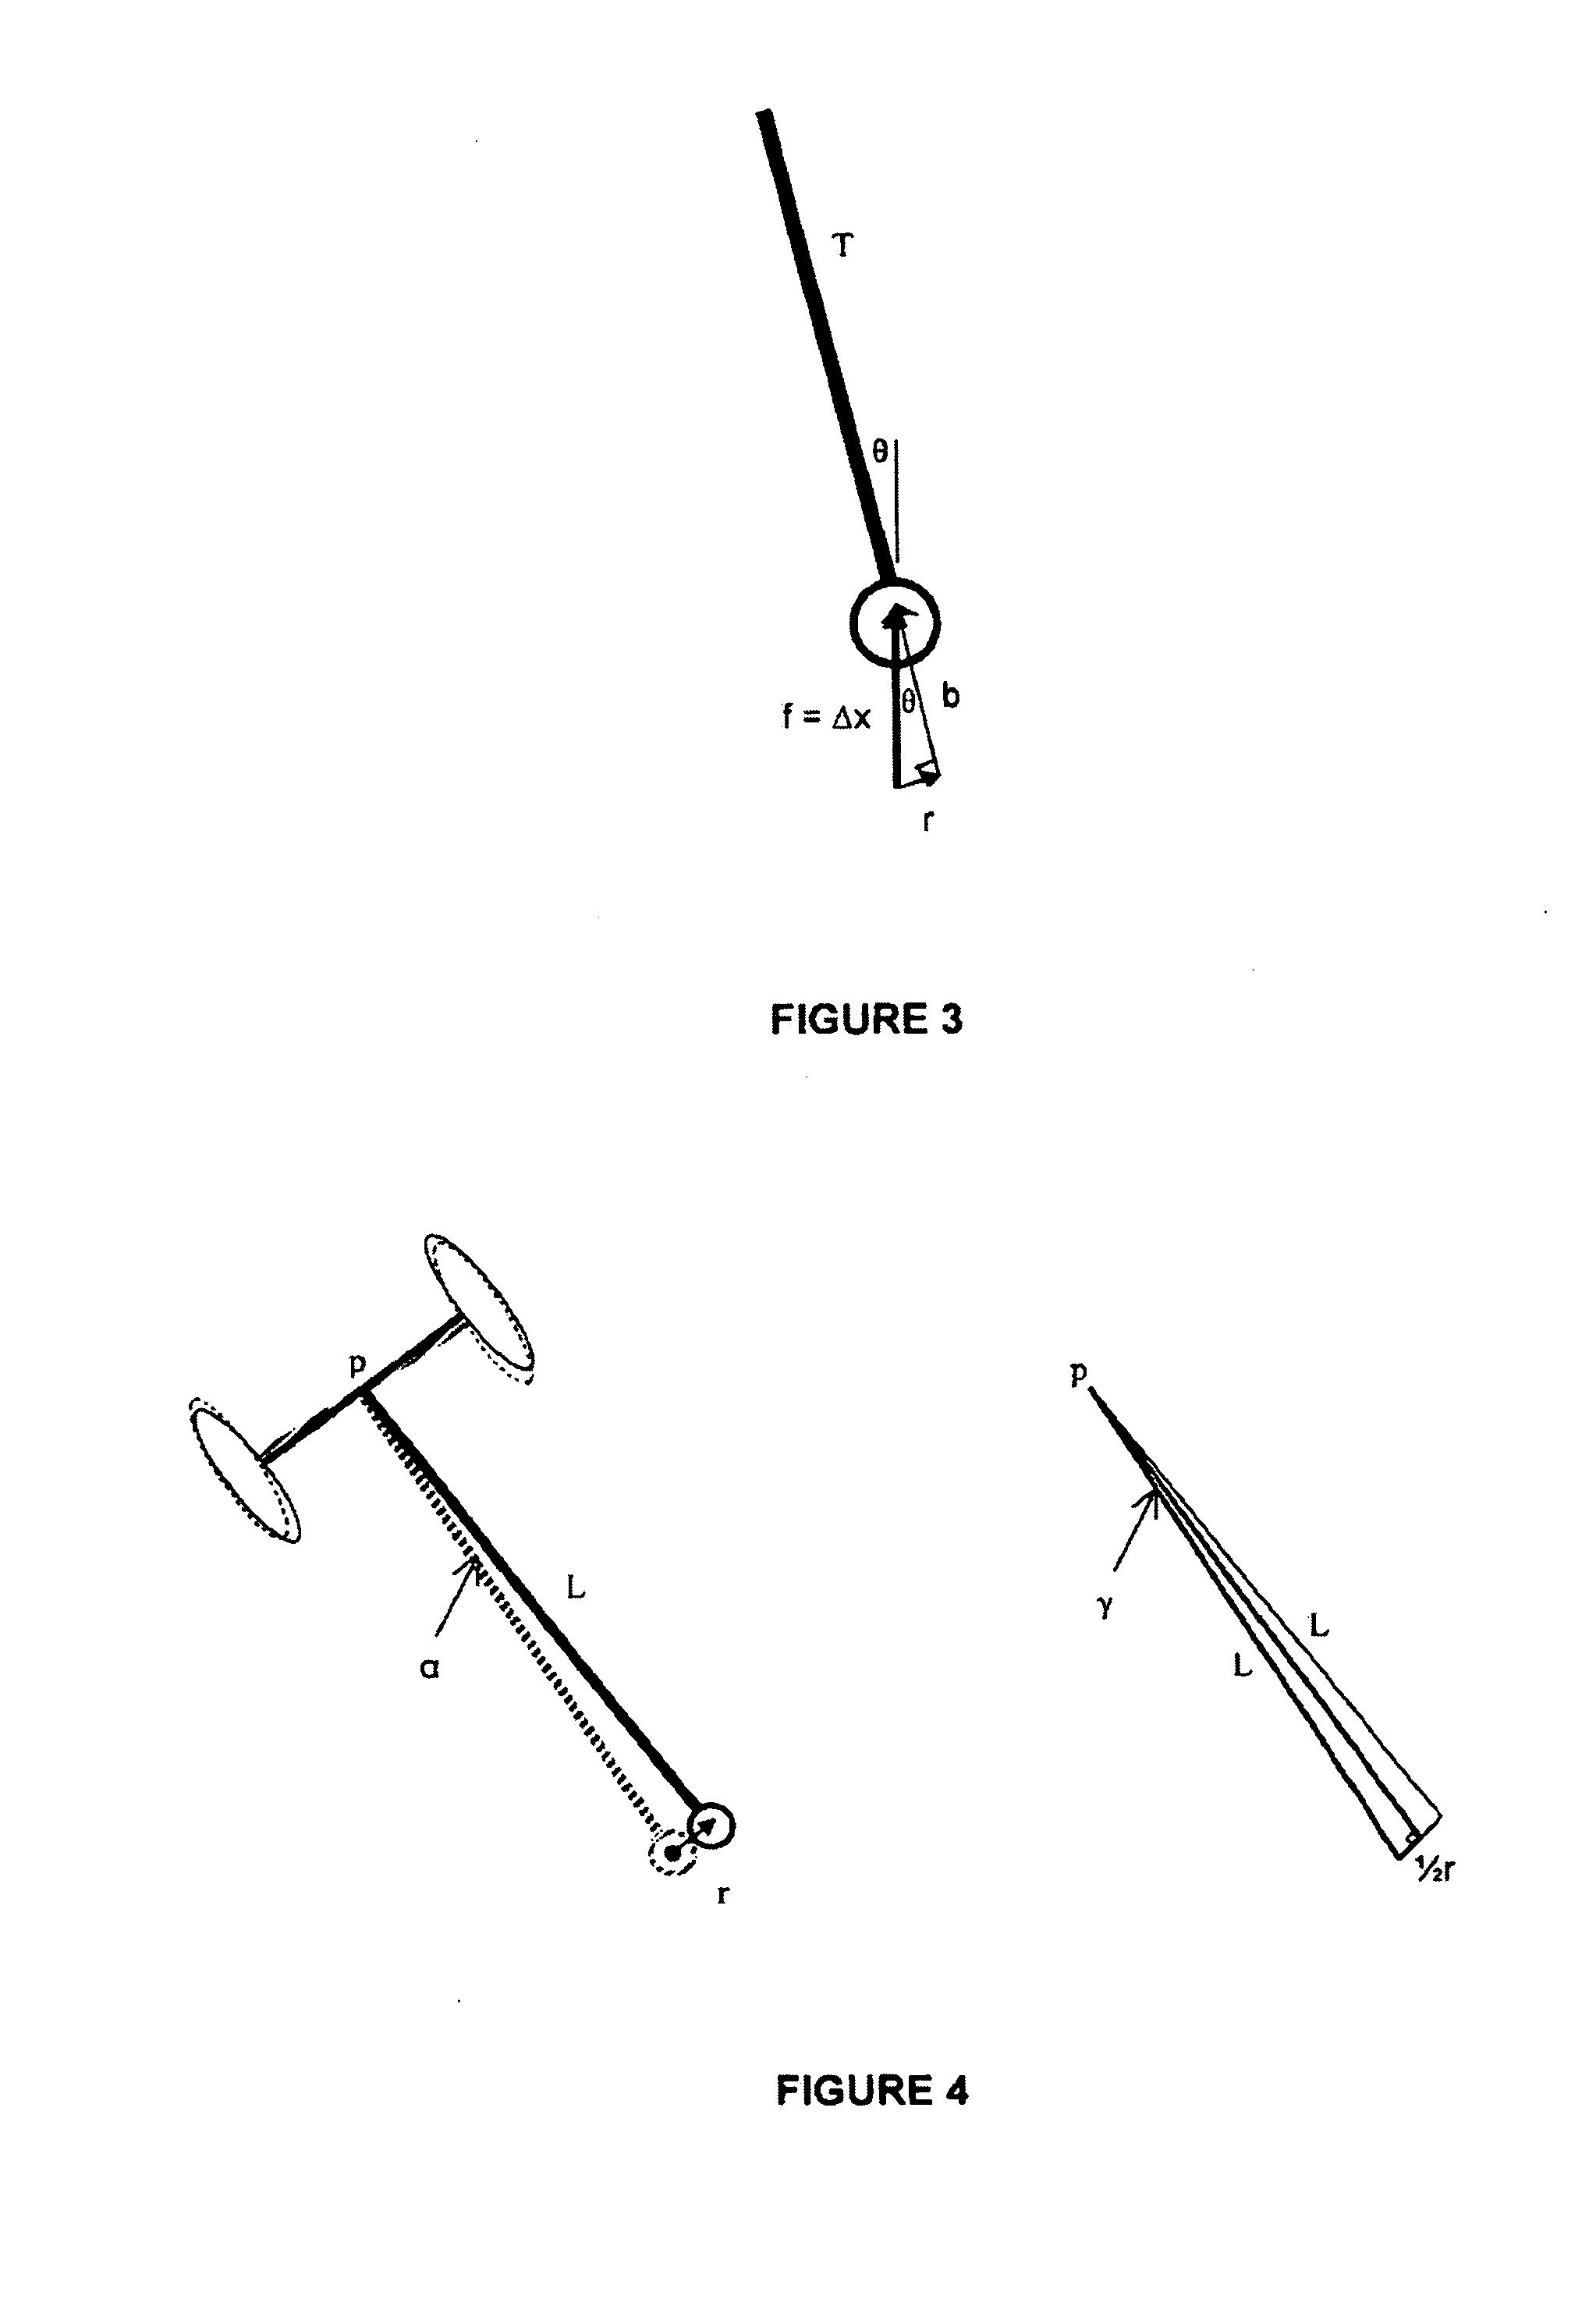 Trailer backing up device and table based method